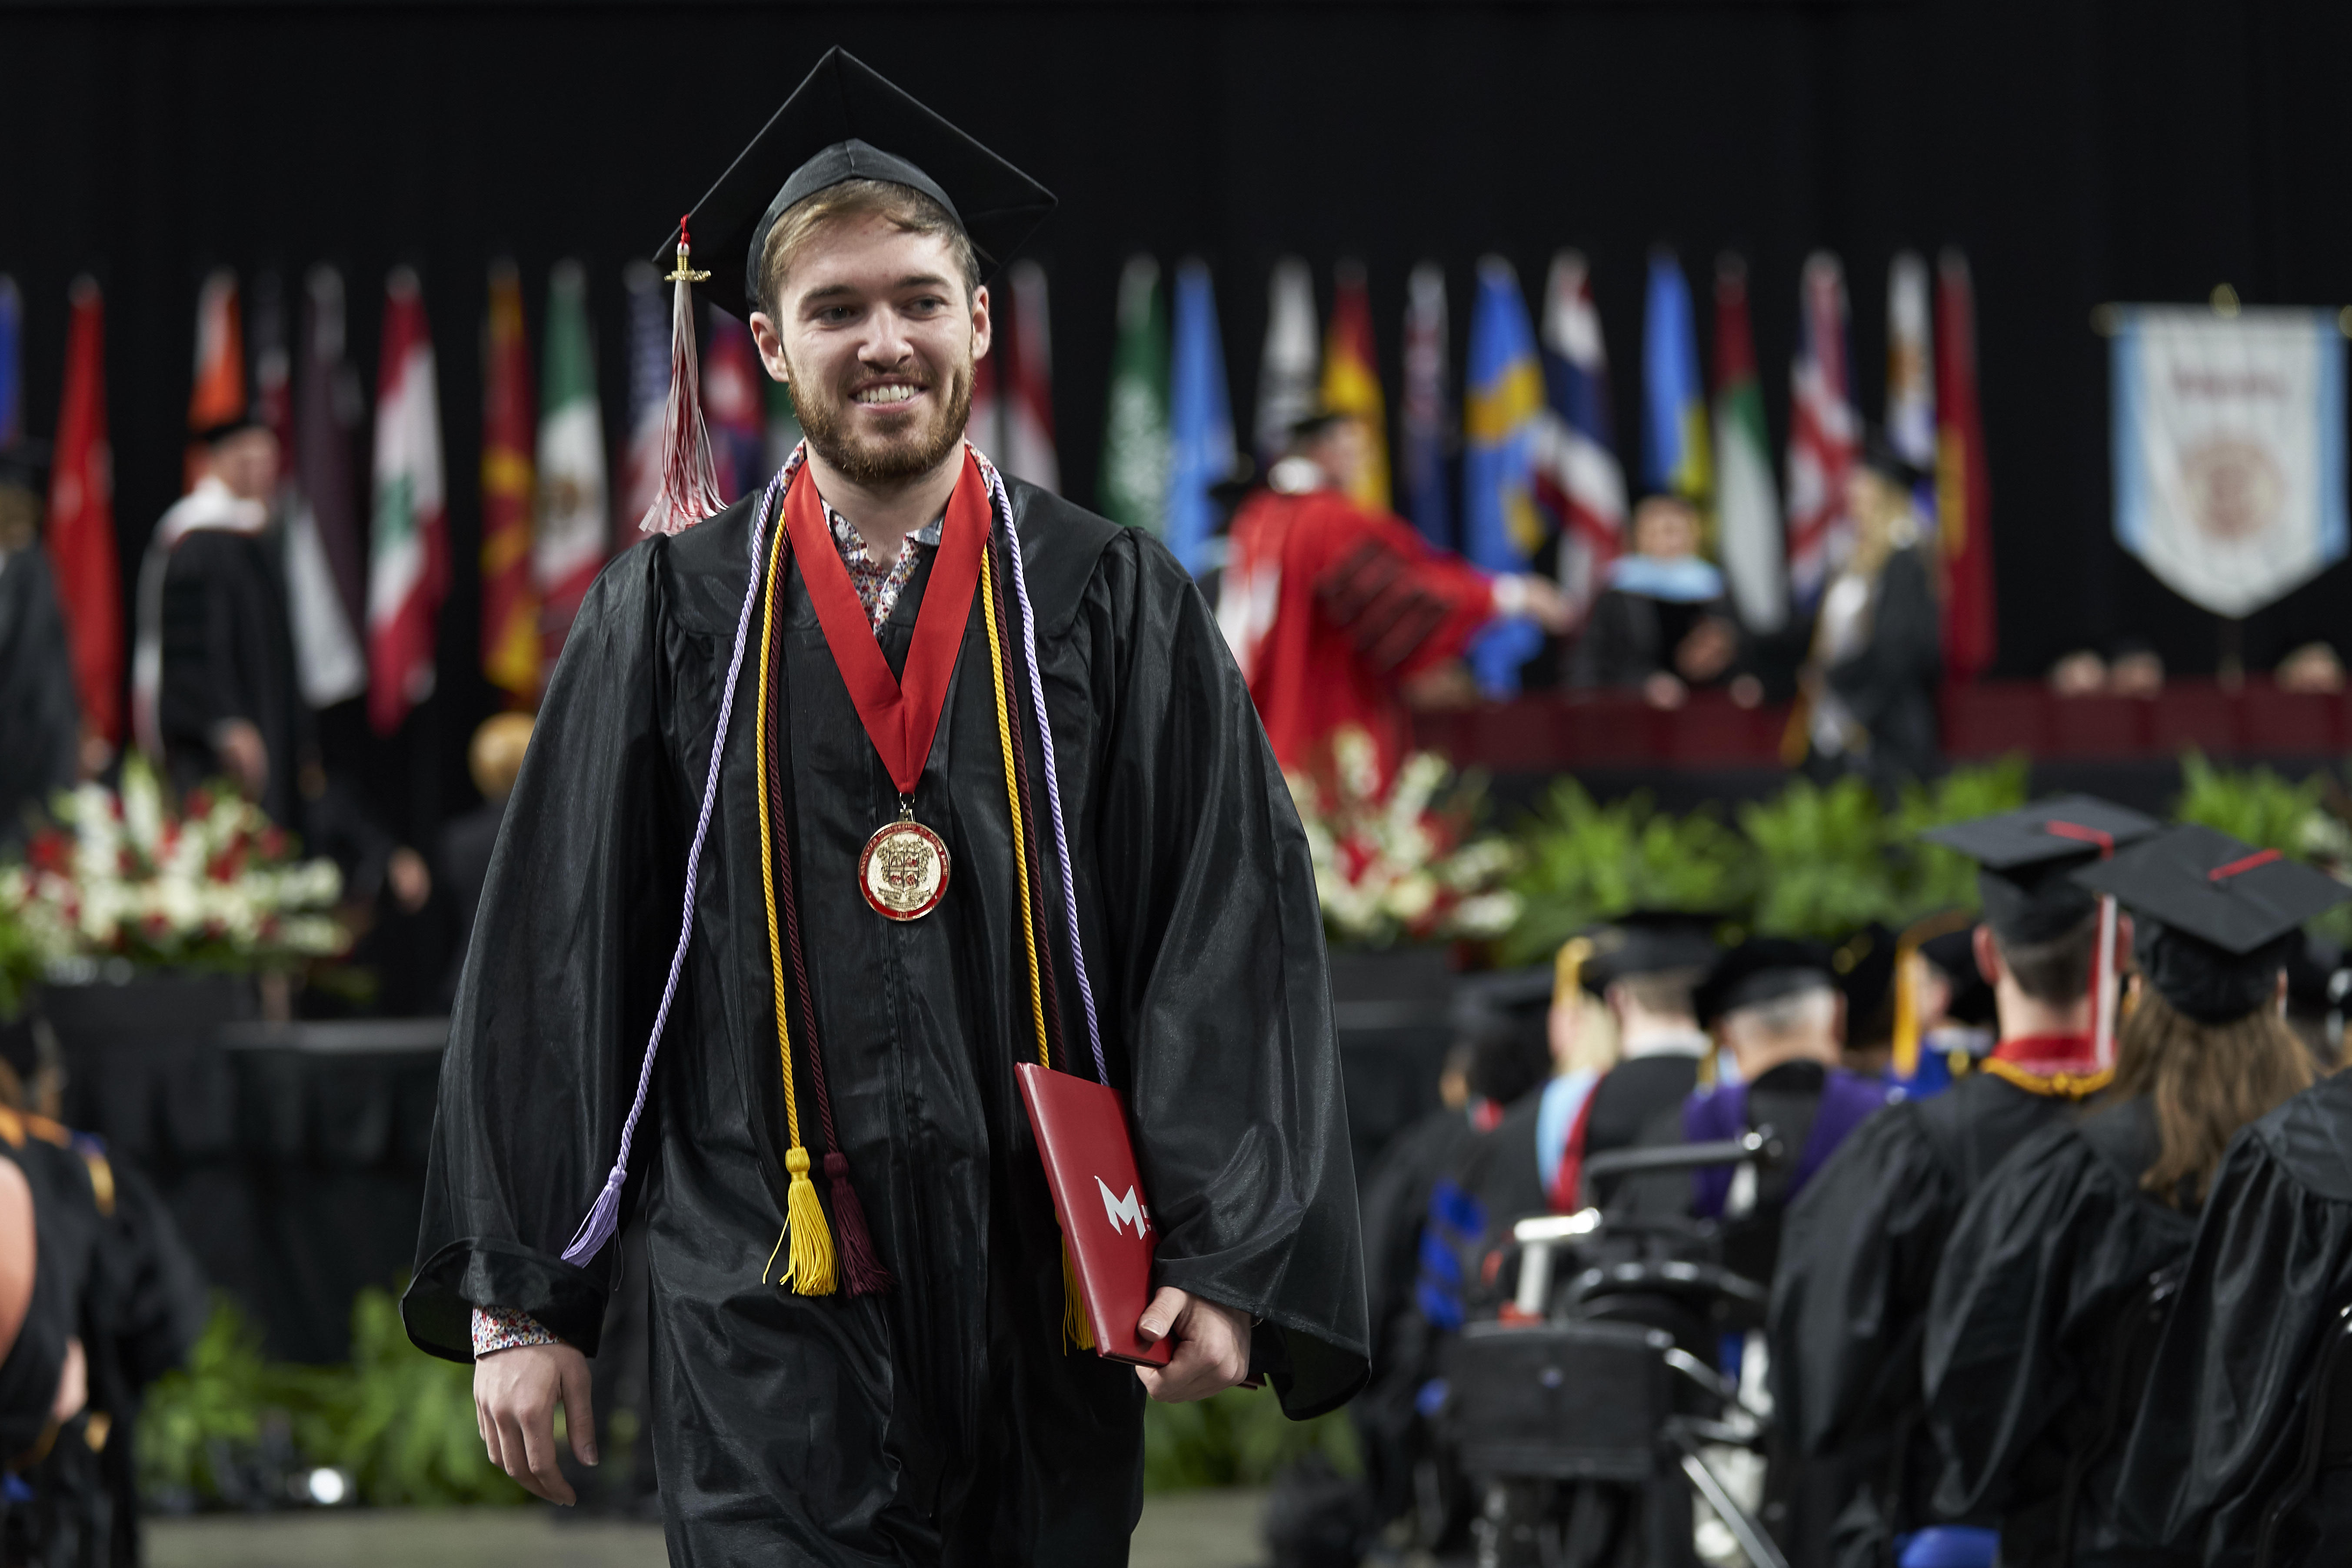 Maryville University’s commencement at The Family Arena on May 5, 2019.